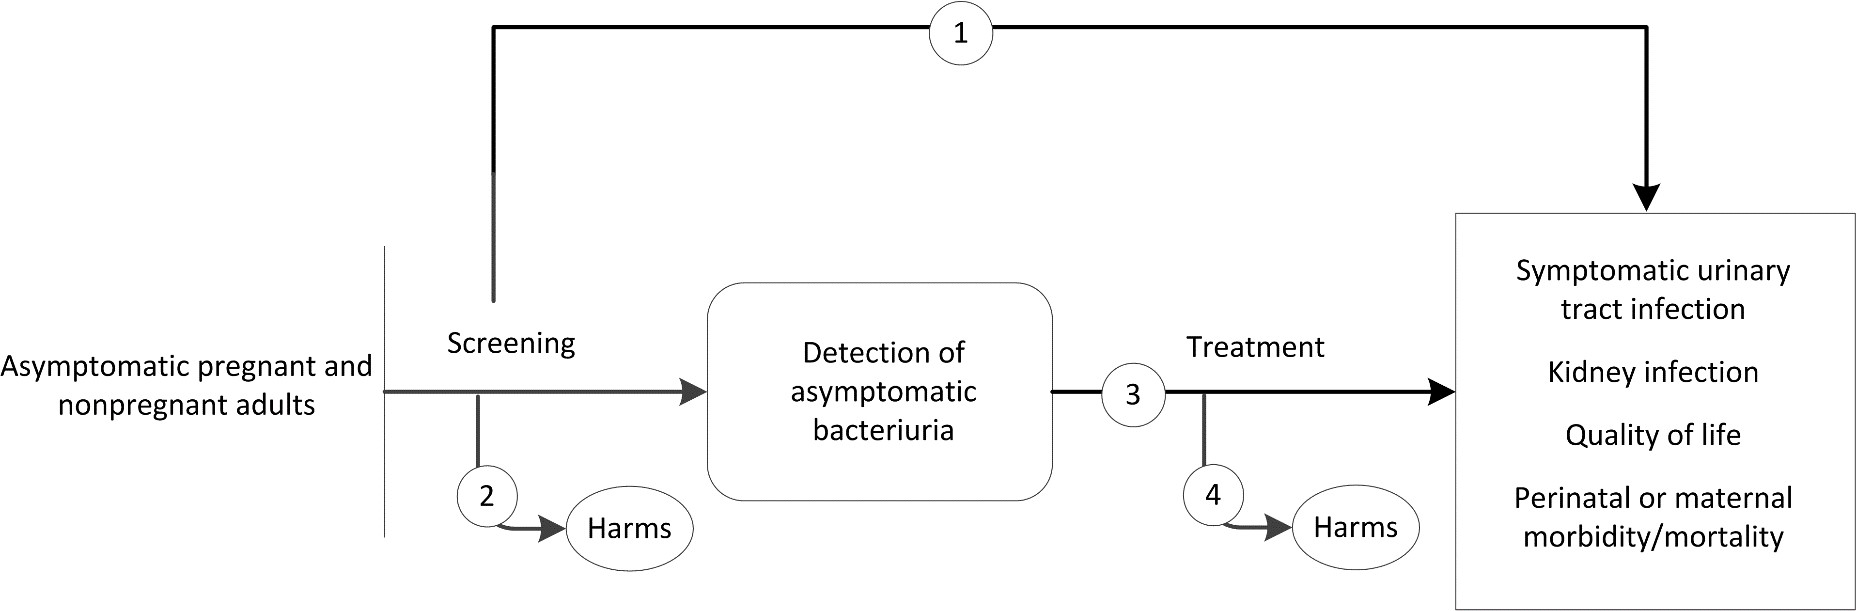 Figure 1 is the analytic framework that depicts the four Key Questions to be addressed in the systematic review. The figure illustrates how screening asymptomatic pregnant and nonpregant adults may result in reducing the incidence of symptomatic urinary tract infection, kidney infection, and perinatal/maternal morbidity or mortality, as well as improving quality of life (KQ1). Once detected, the figure shows how treatment of asymptomatic bacteriuria may result in improved health outcomes (KQ3). Further, the figure illustrates whether screening for and treatment of asymptomatic bacteriuria are associated with any adverse events (KQ2, KQ4).